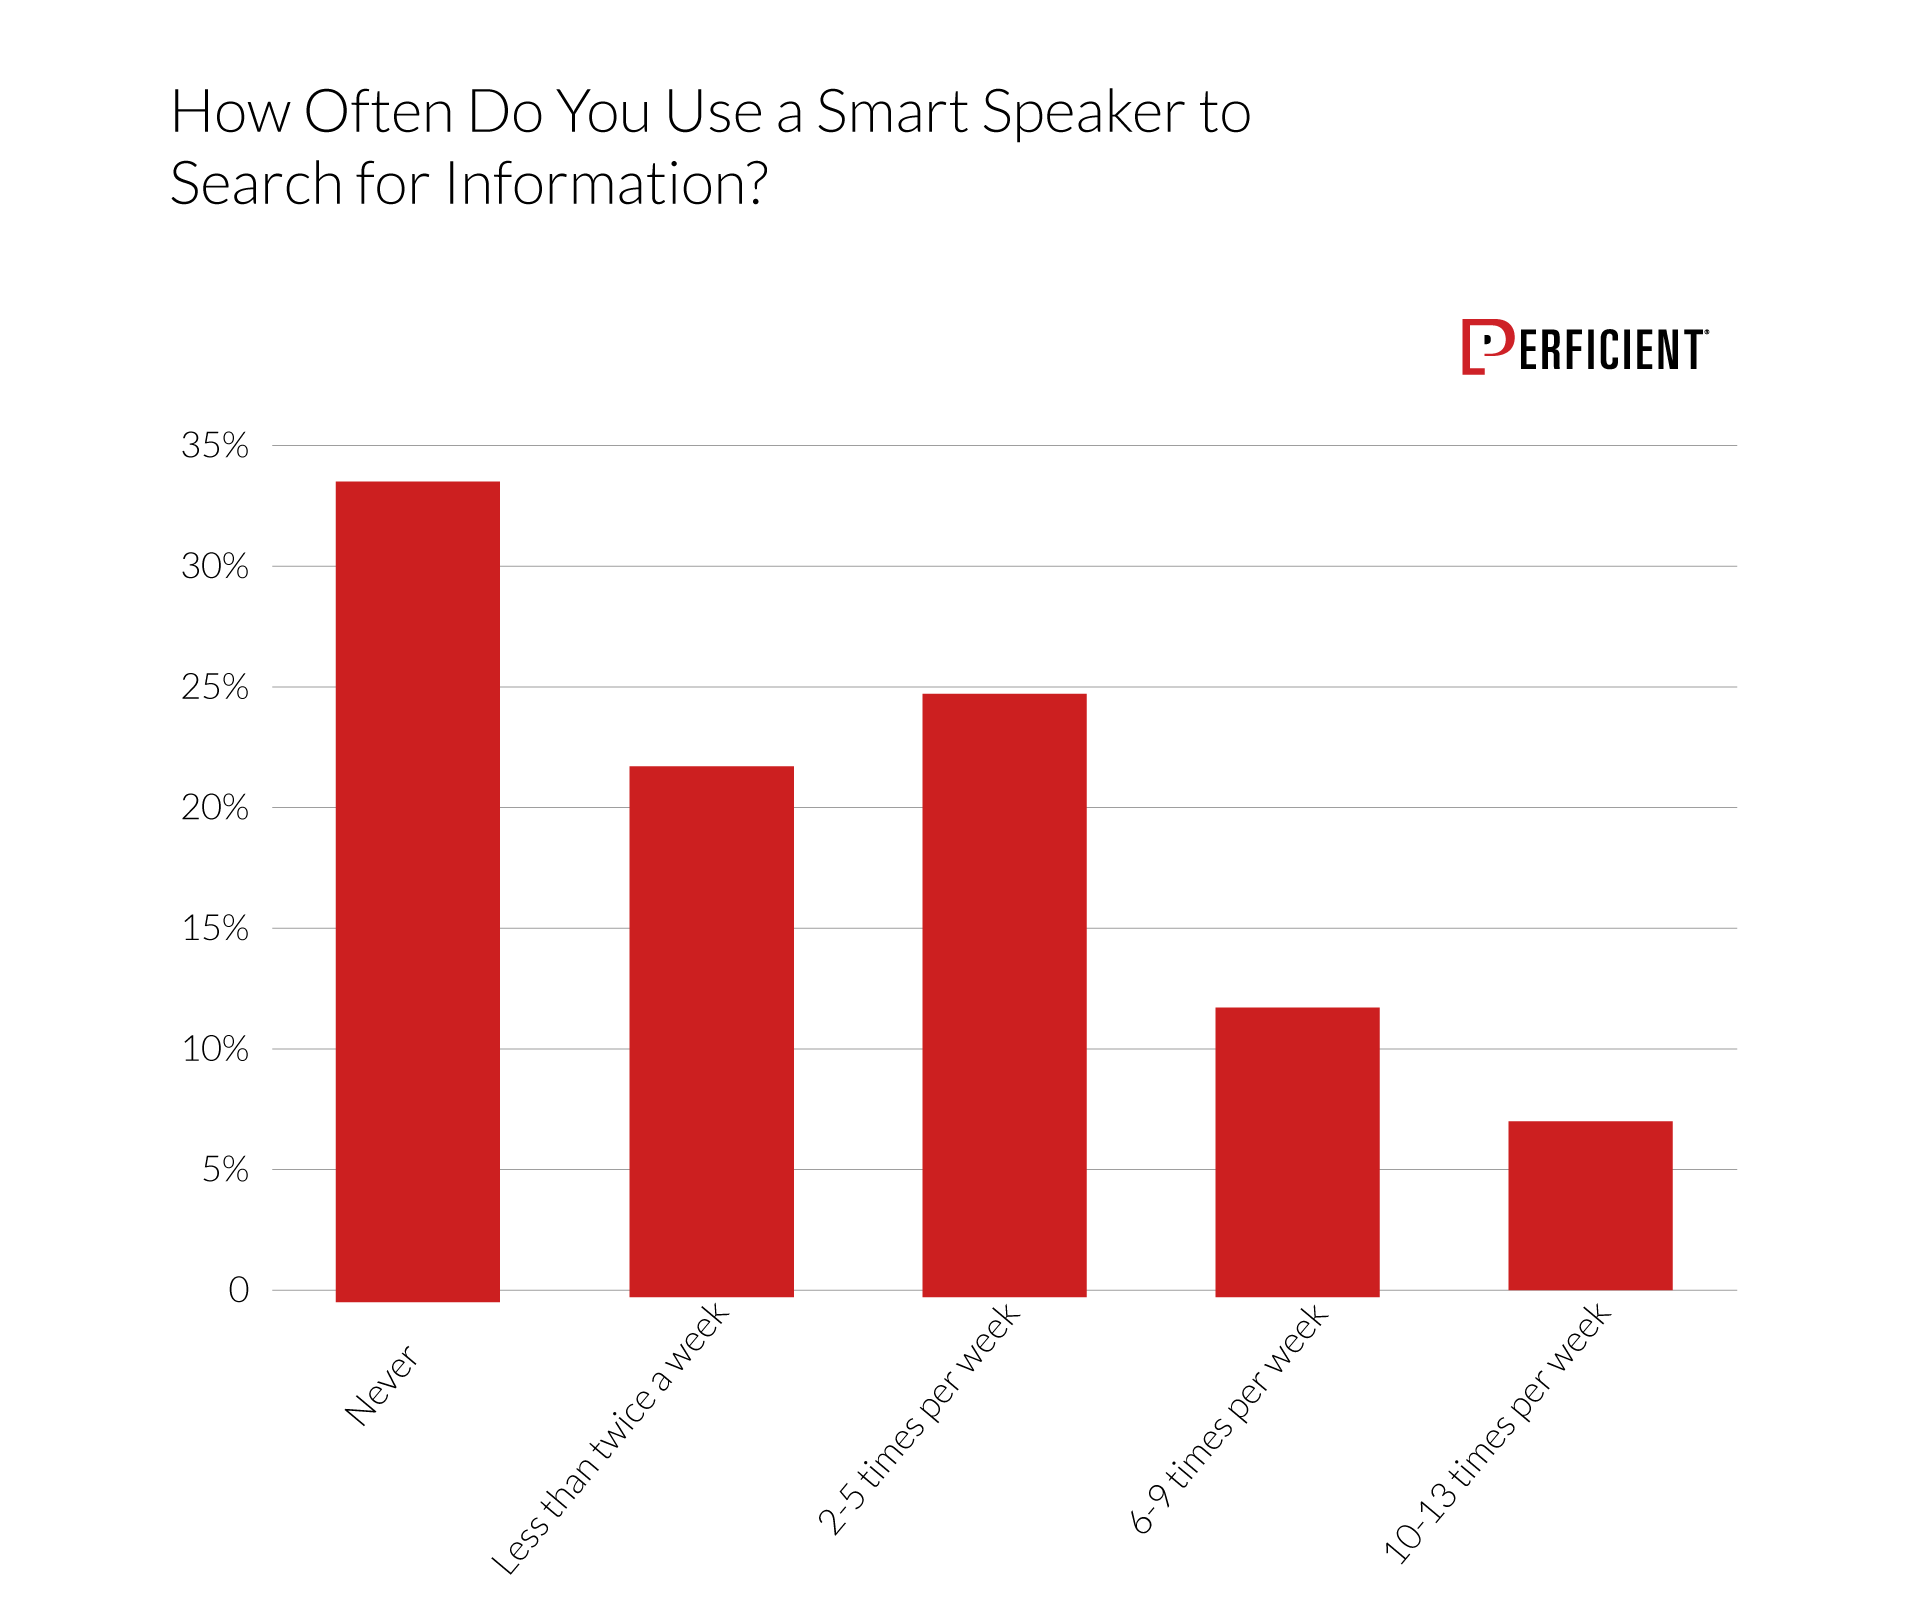 Chart shows how often users make use of smart speakers